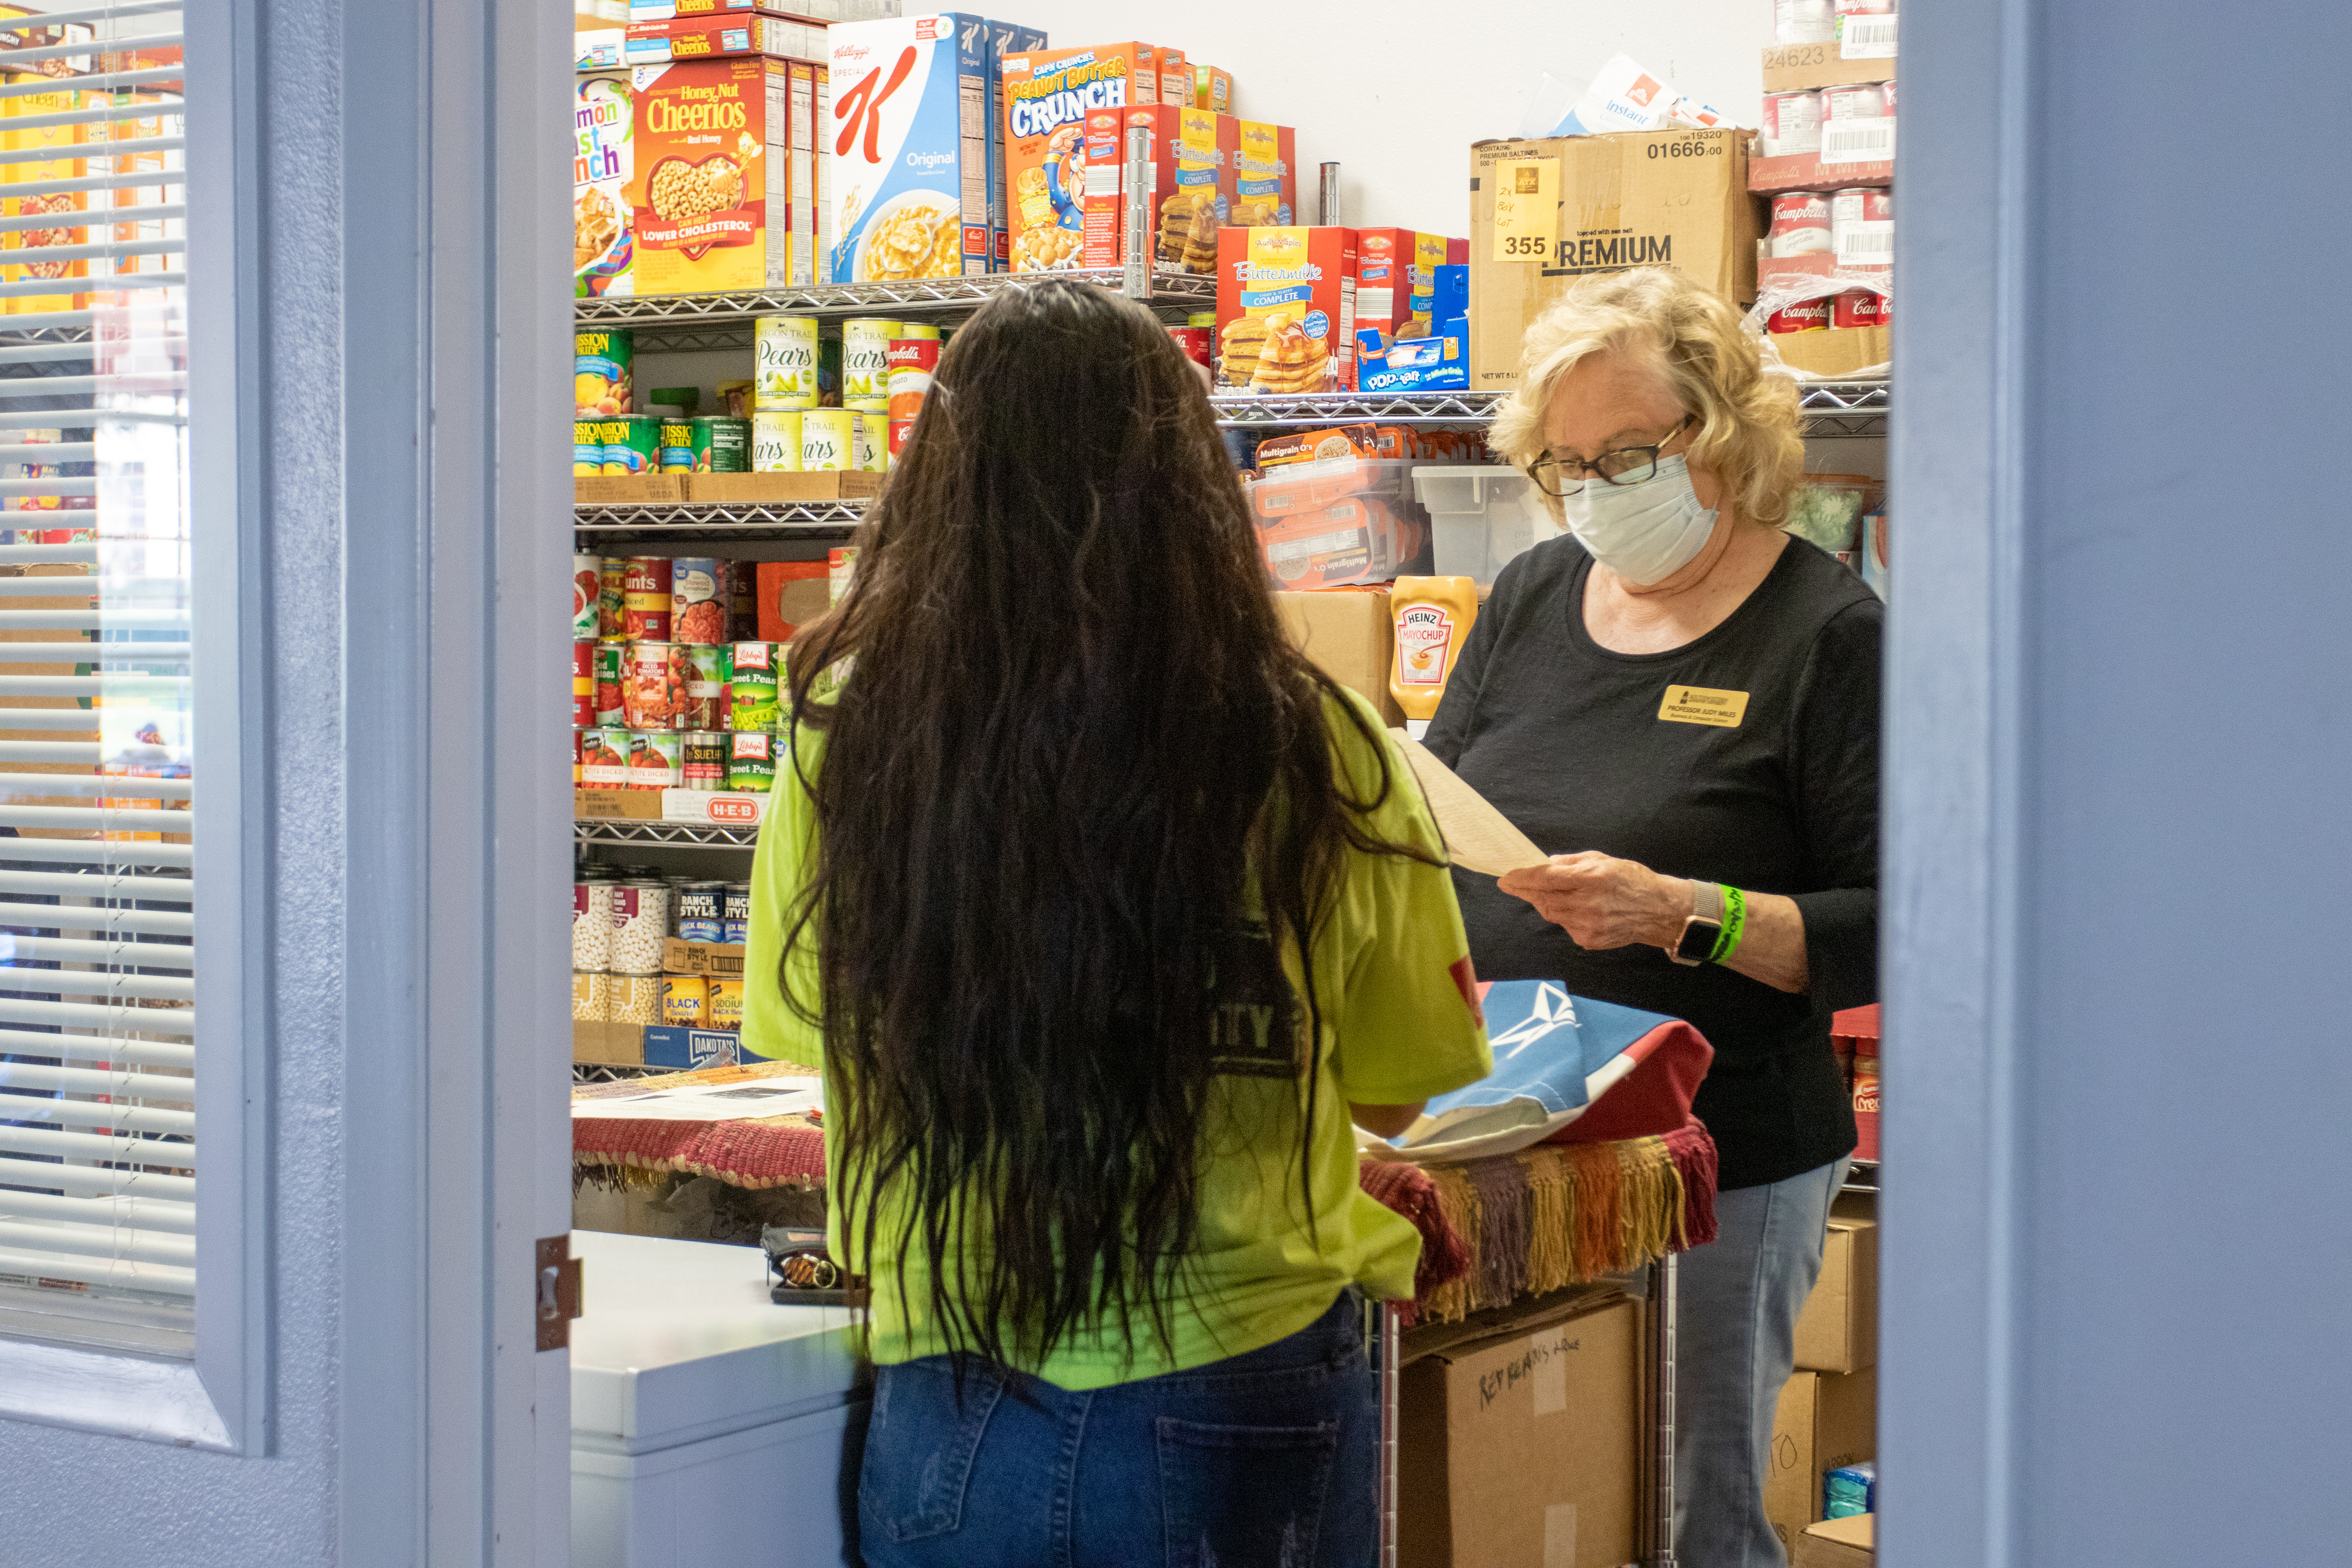 Young student talking to older woman standing in a food pantry